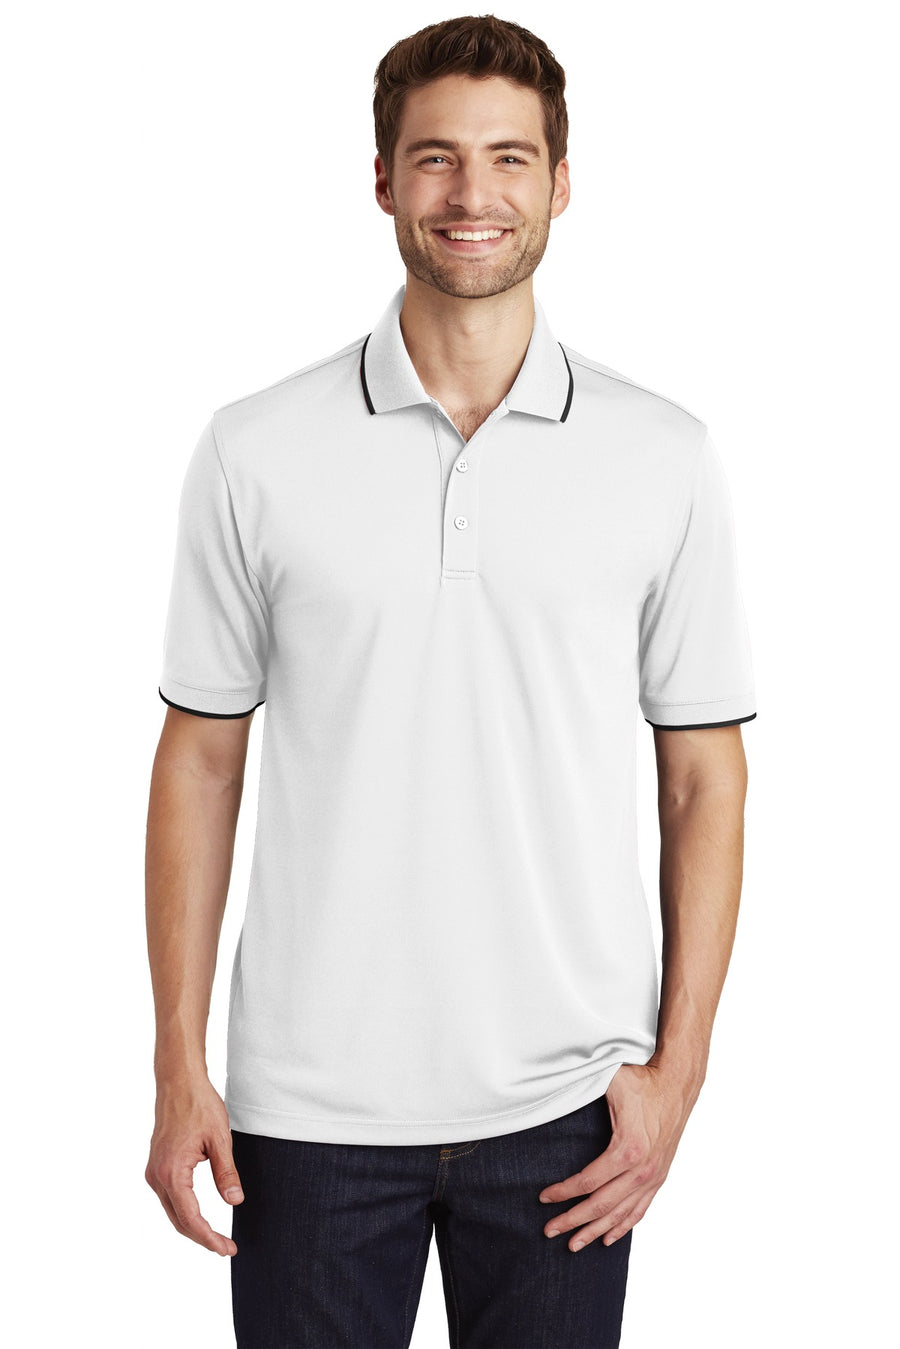 Port Authority Dry Zone UV Micro-Mesh Tipped Polo.